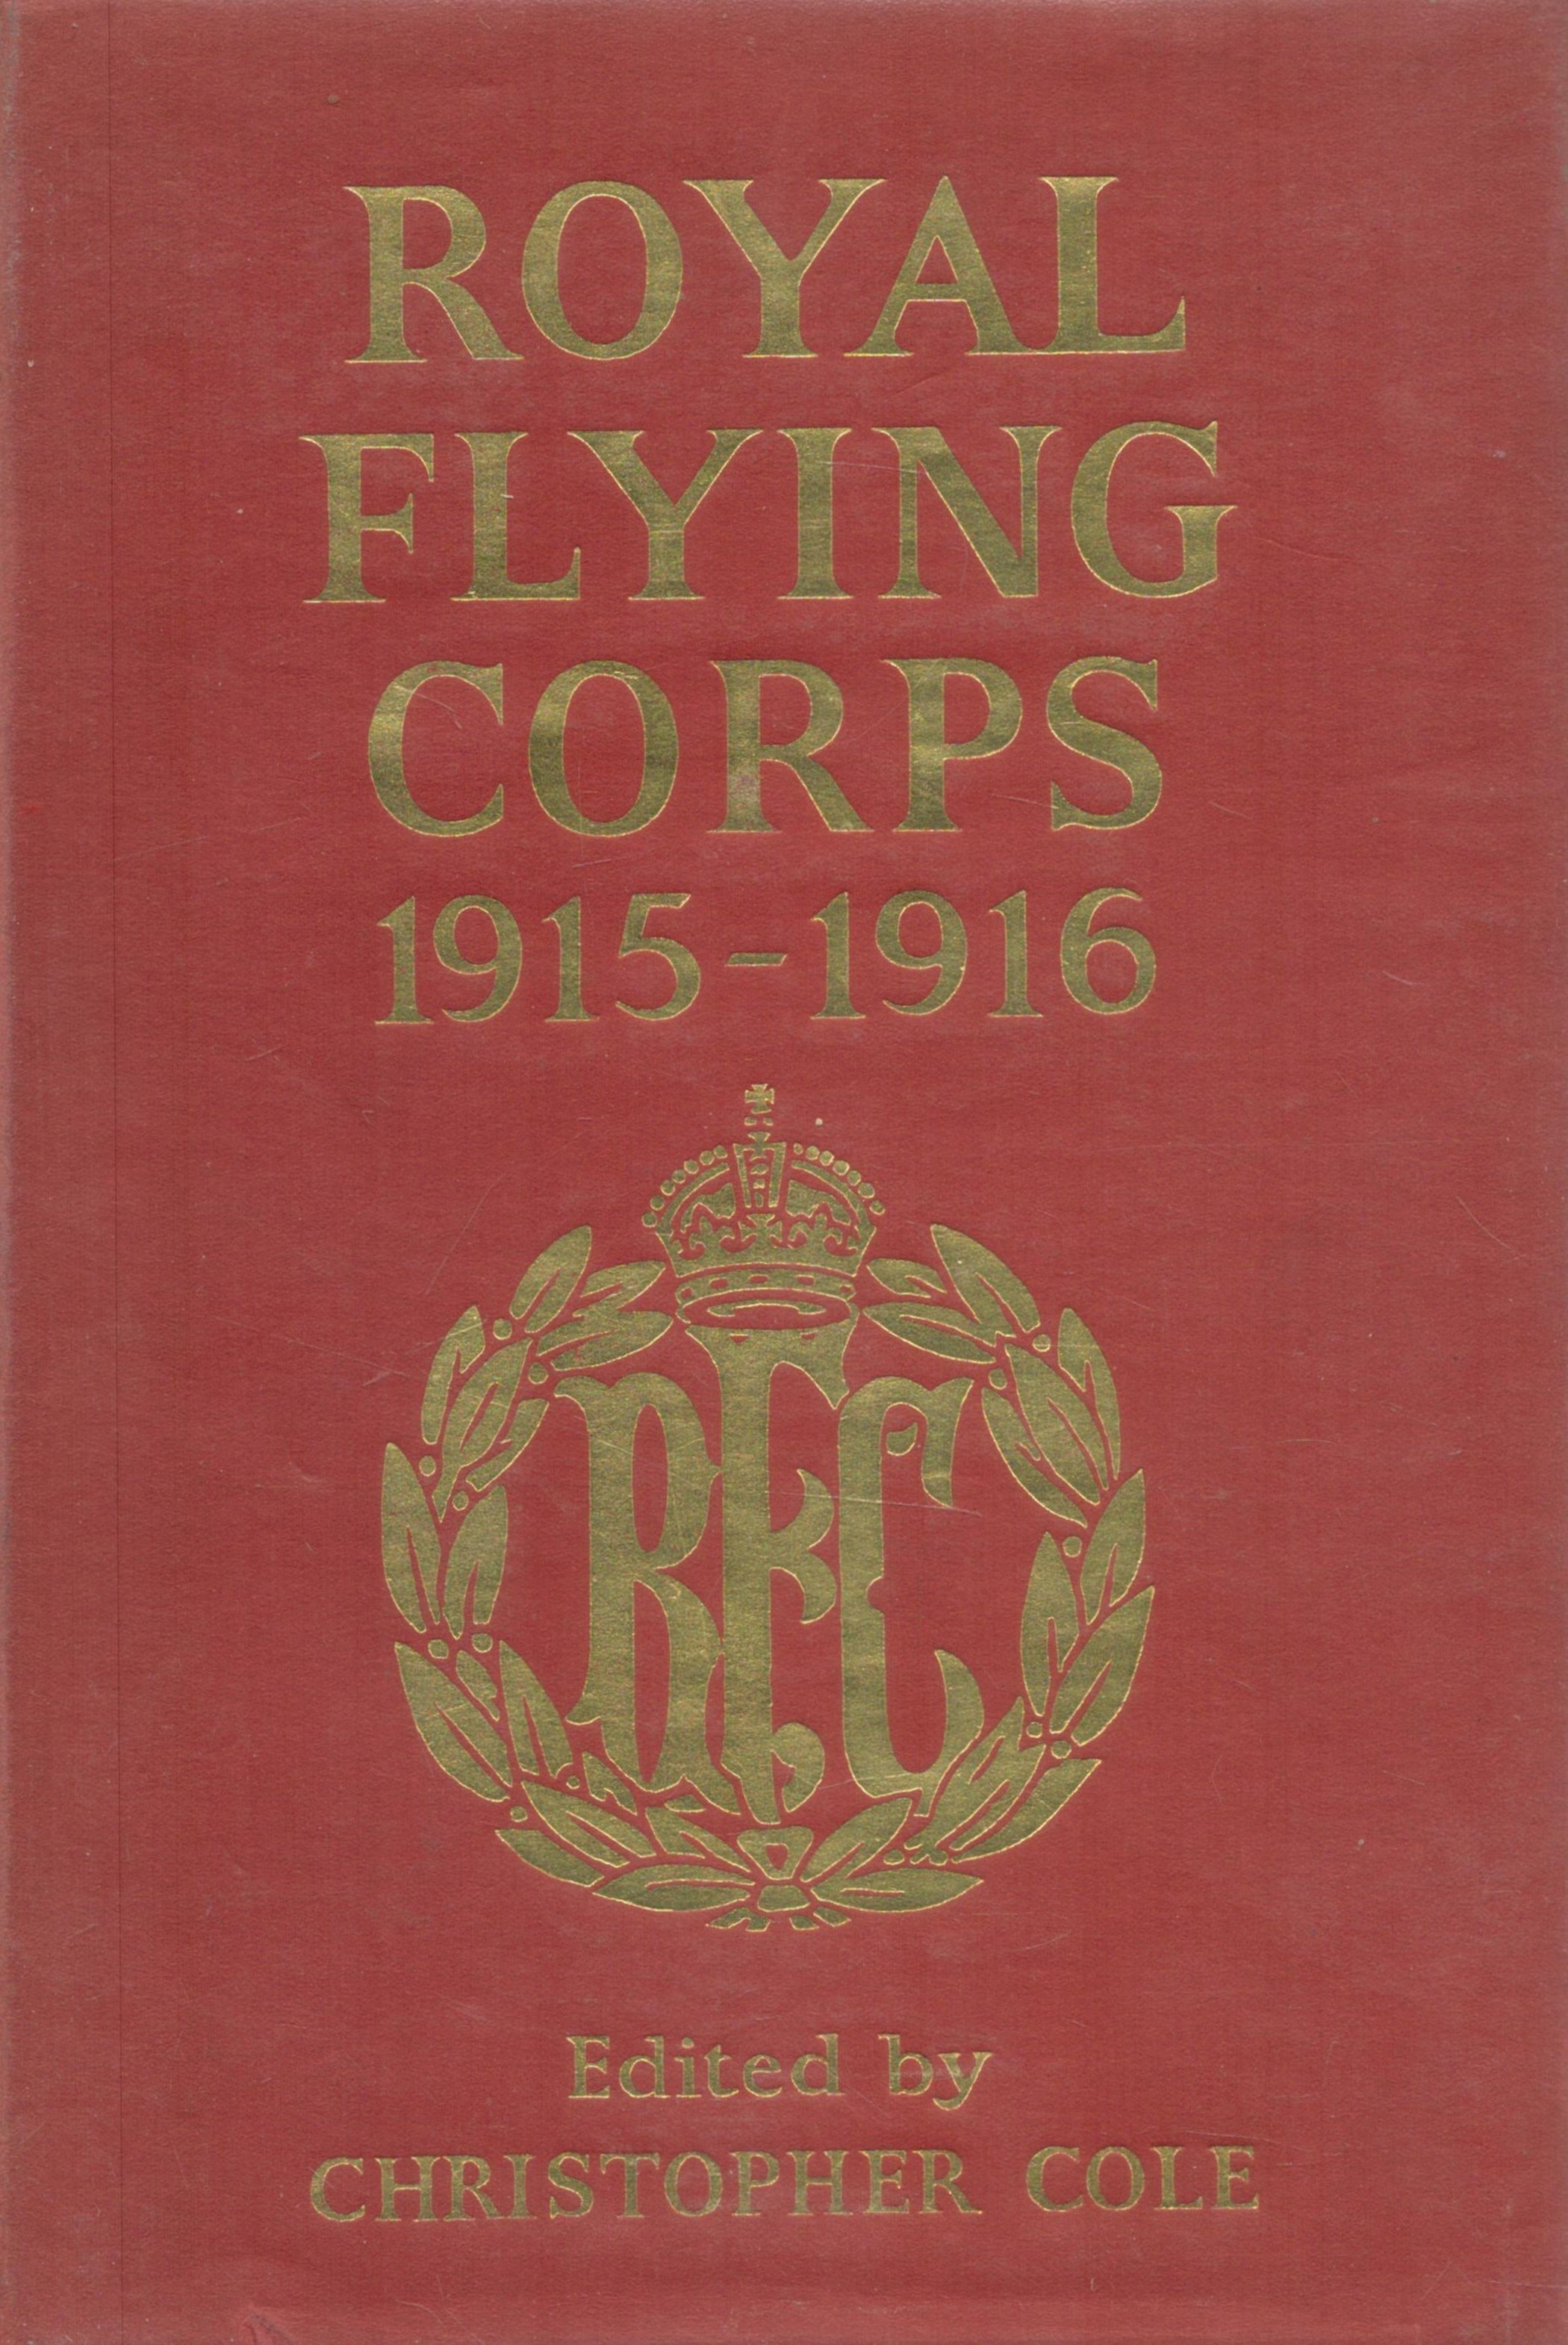 Royal Flying Corps 1915 1916 1st Edition Hardback Book by Christopher Cole. Published in 1969.